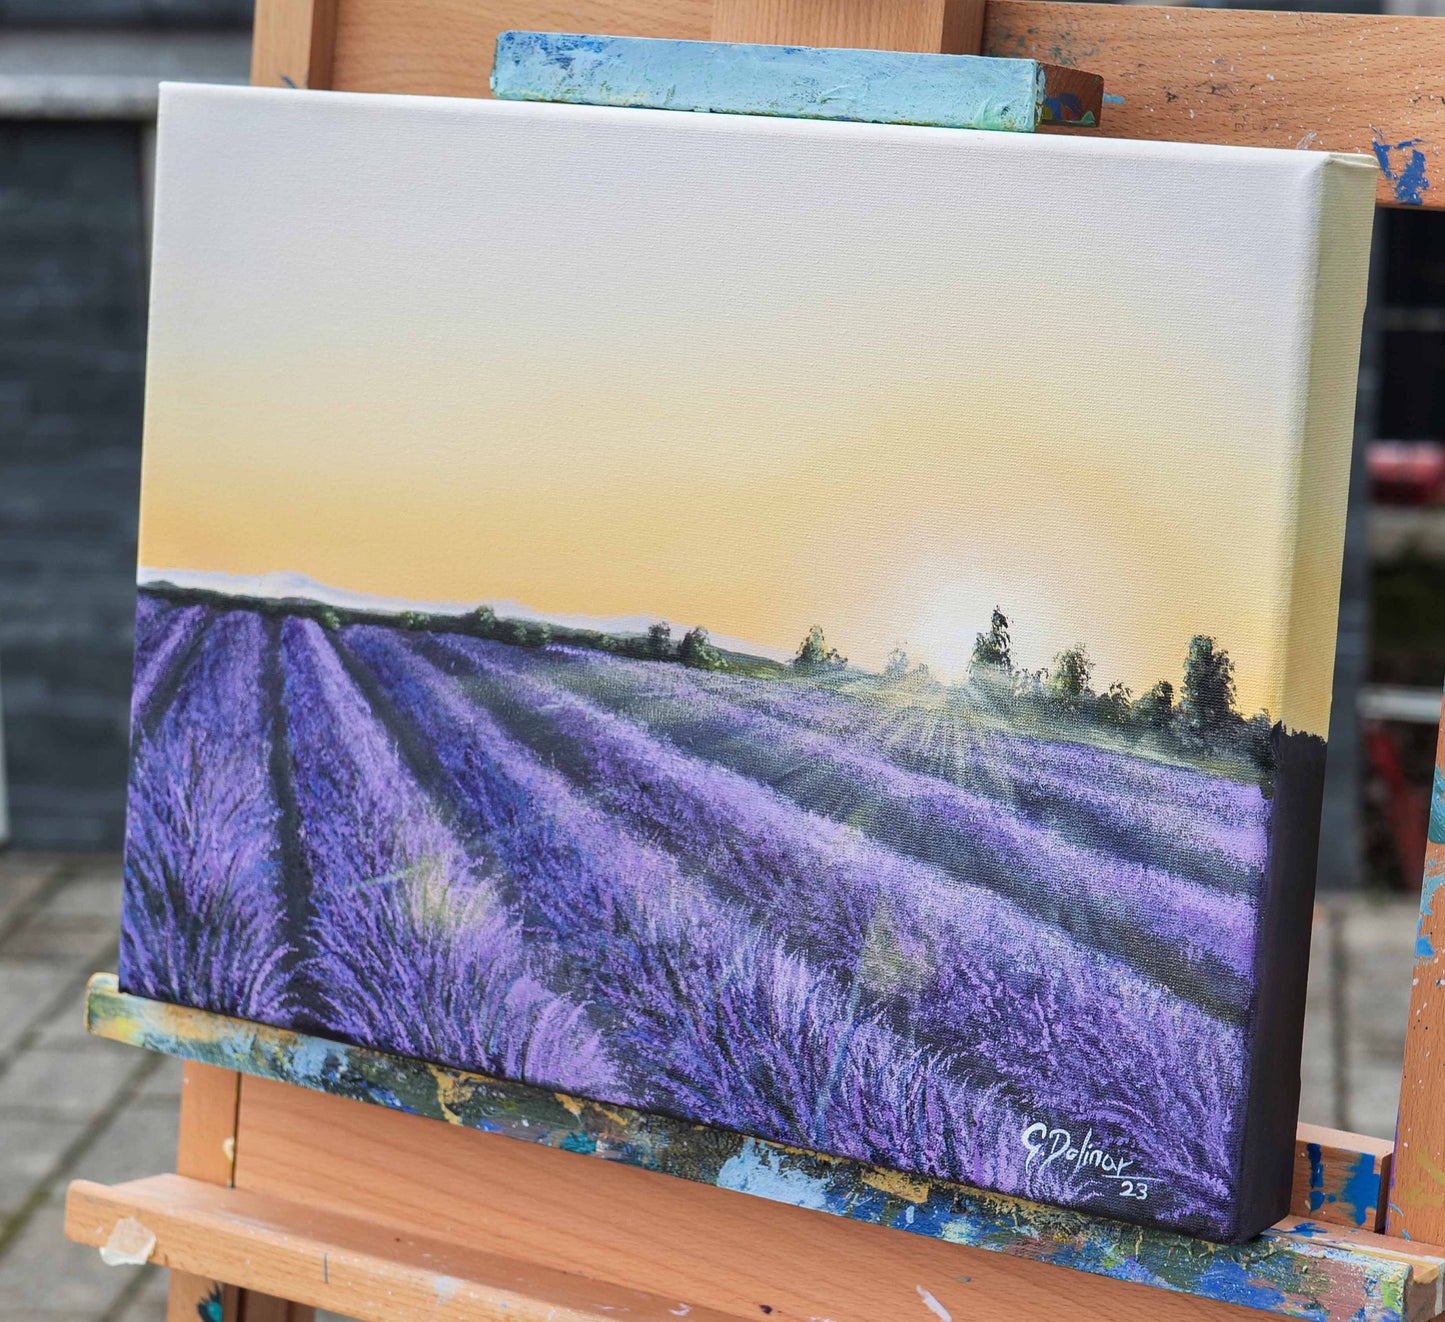 Lavender Field | Landscape | Countryside | Sunset | Serenity | Canvas Print